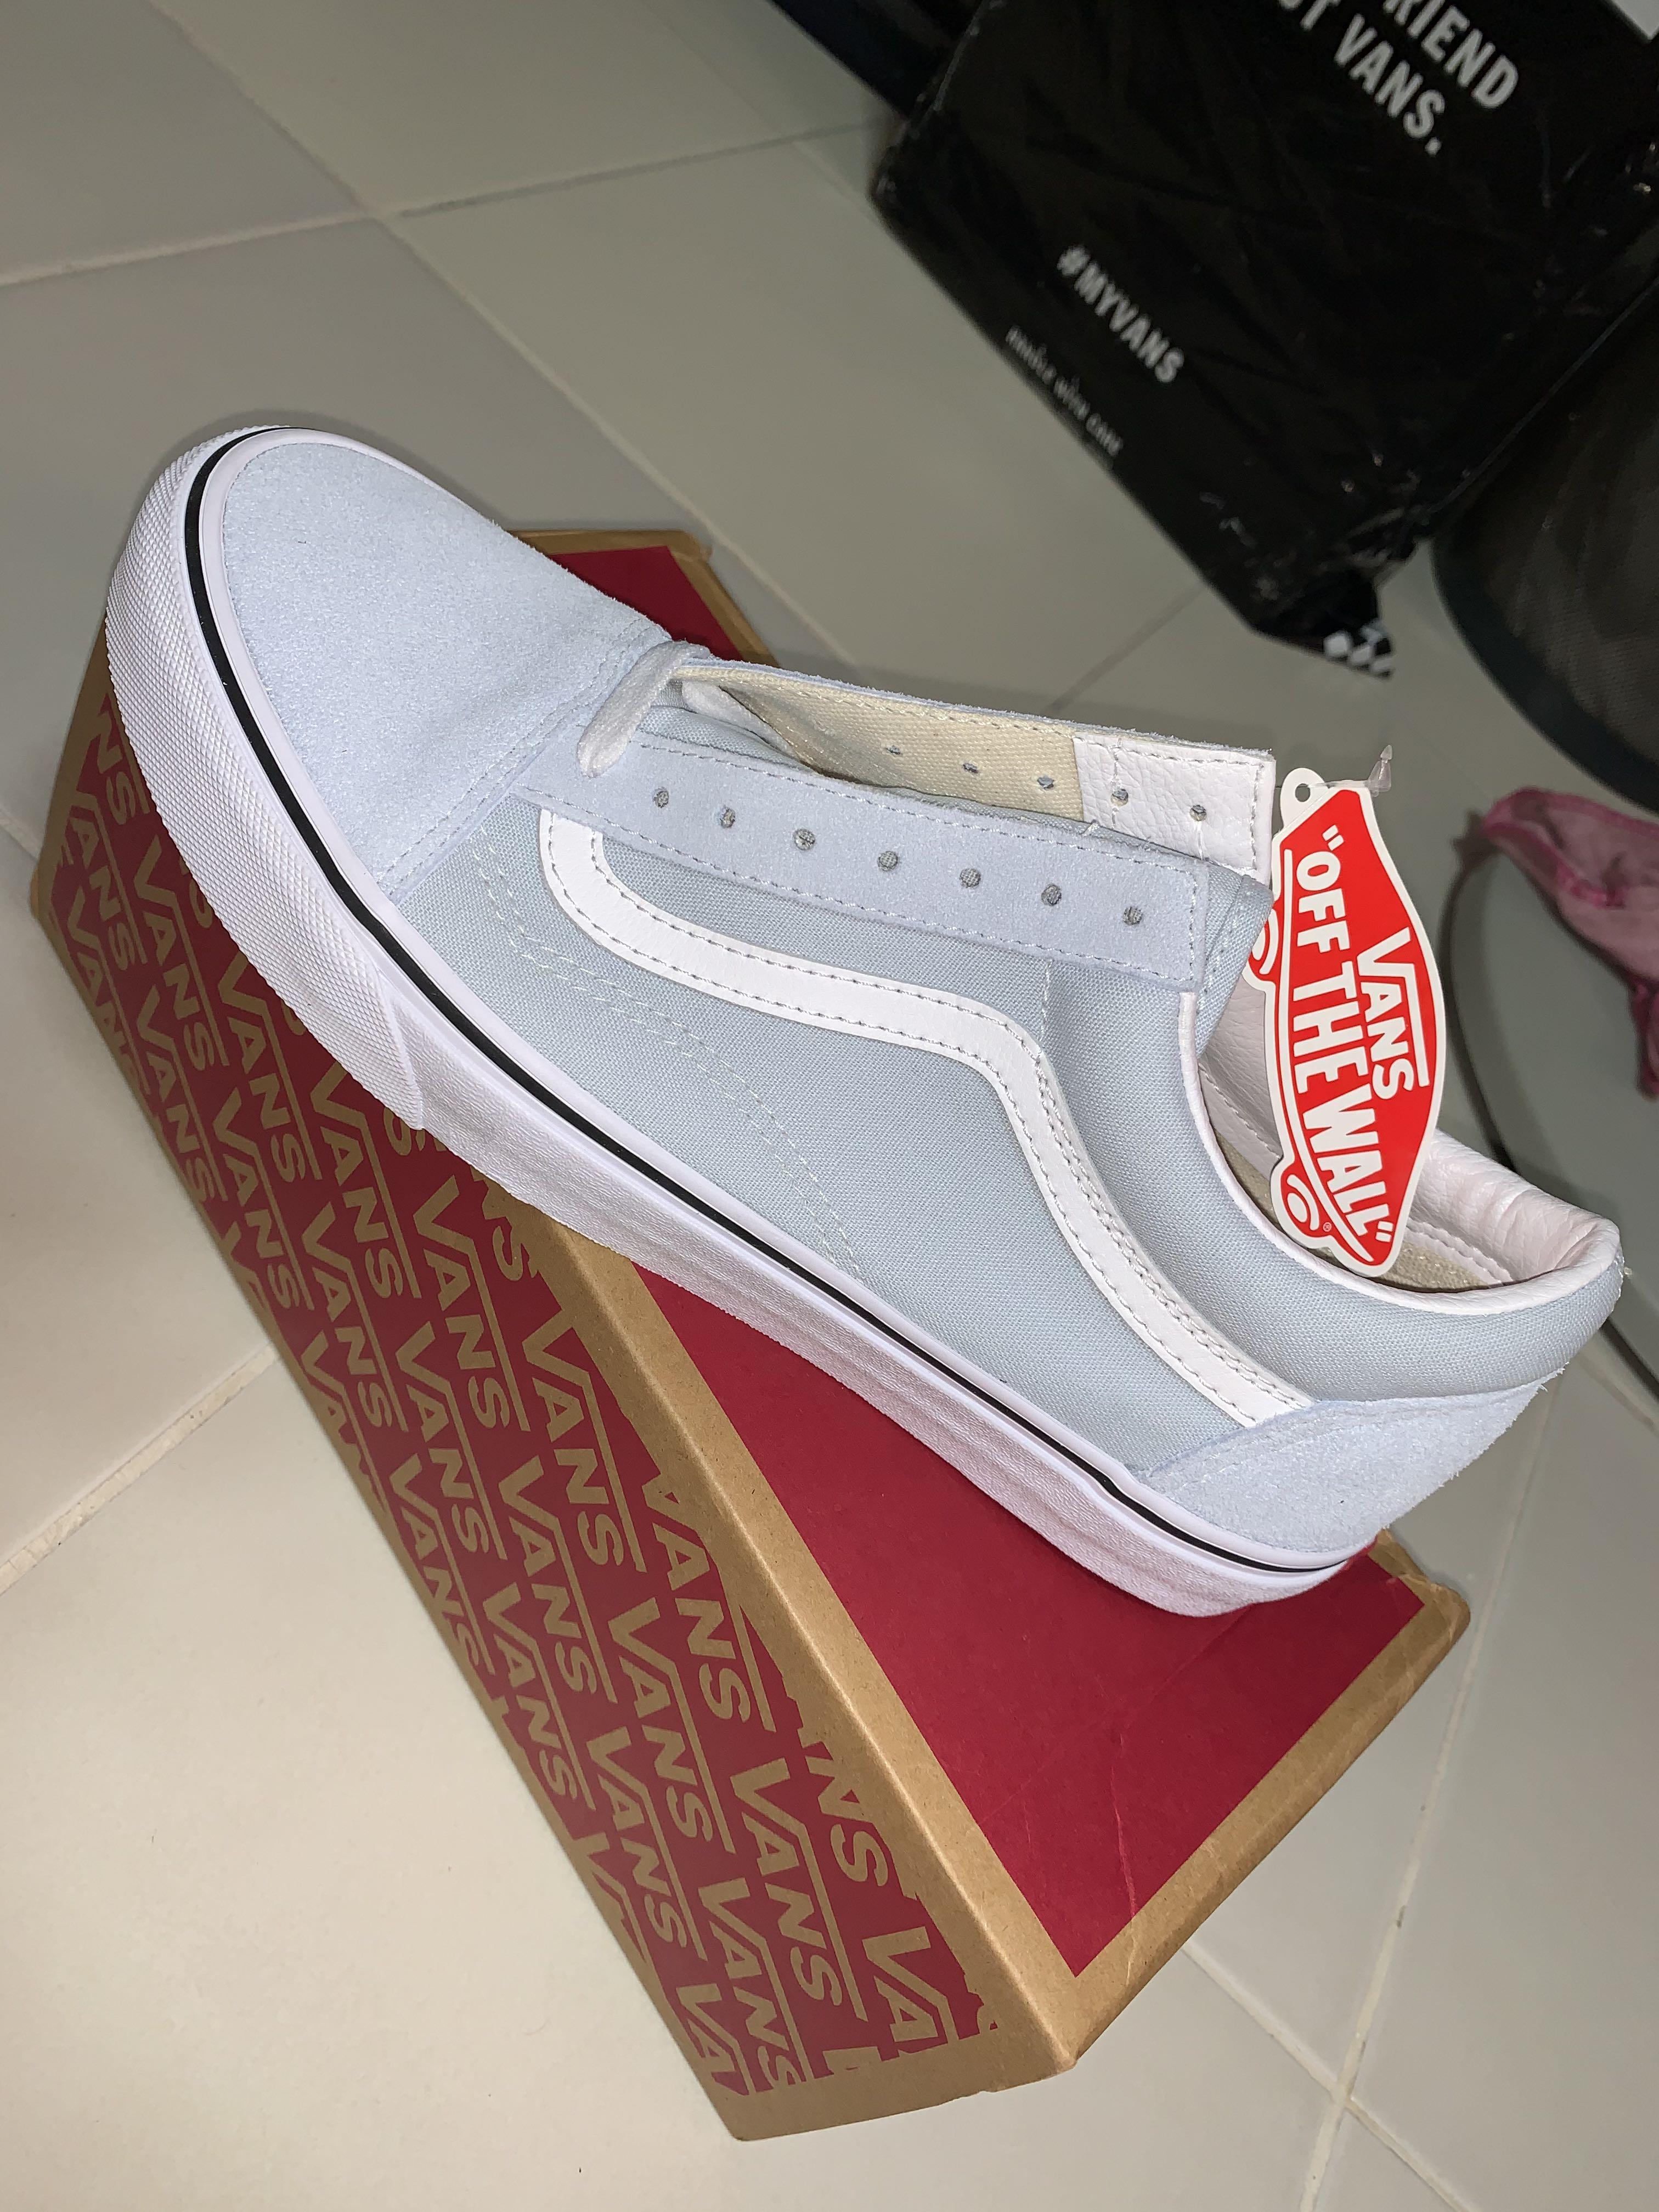 BNIB Vans Old Baby Blue/Ballad Blue Size EU 41/US 8.5 100% authentic, Men's Fashion, Footwear, Shoes on Carousell